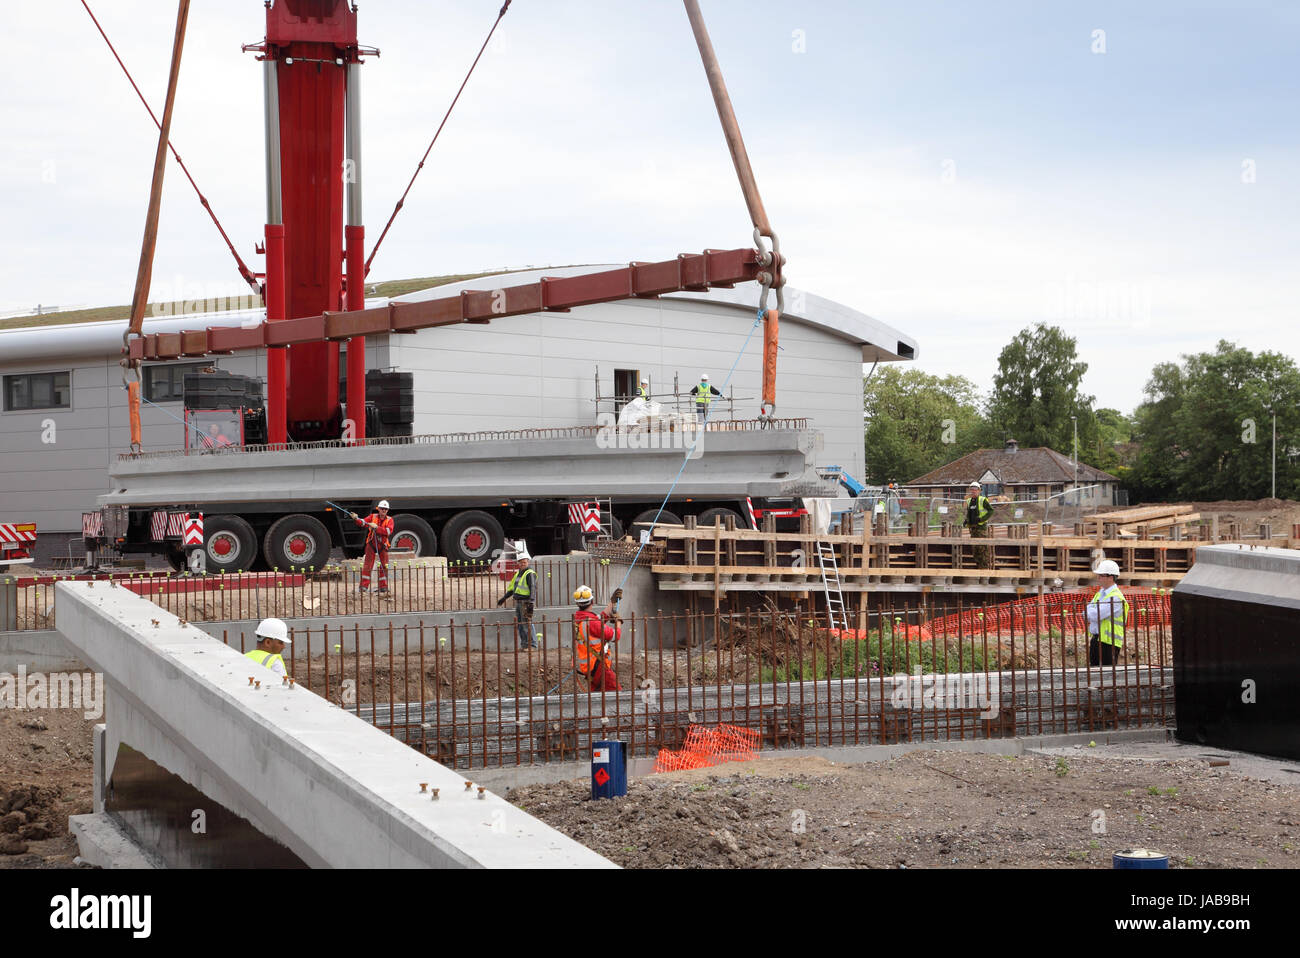 A mobile crane lifts a large, pre-cast concrete beam into place for the construction of a new road bridge in Woking, Surrey, UK Stock Photo